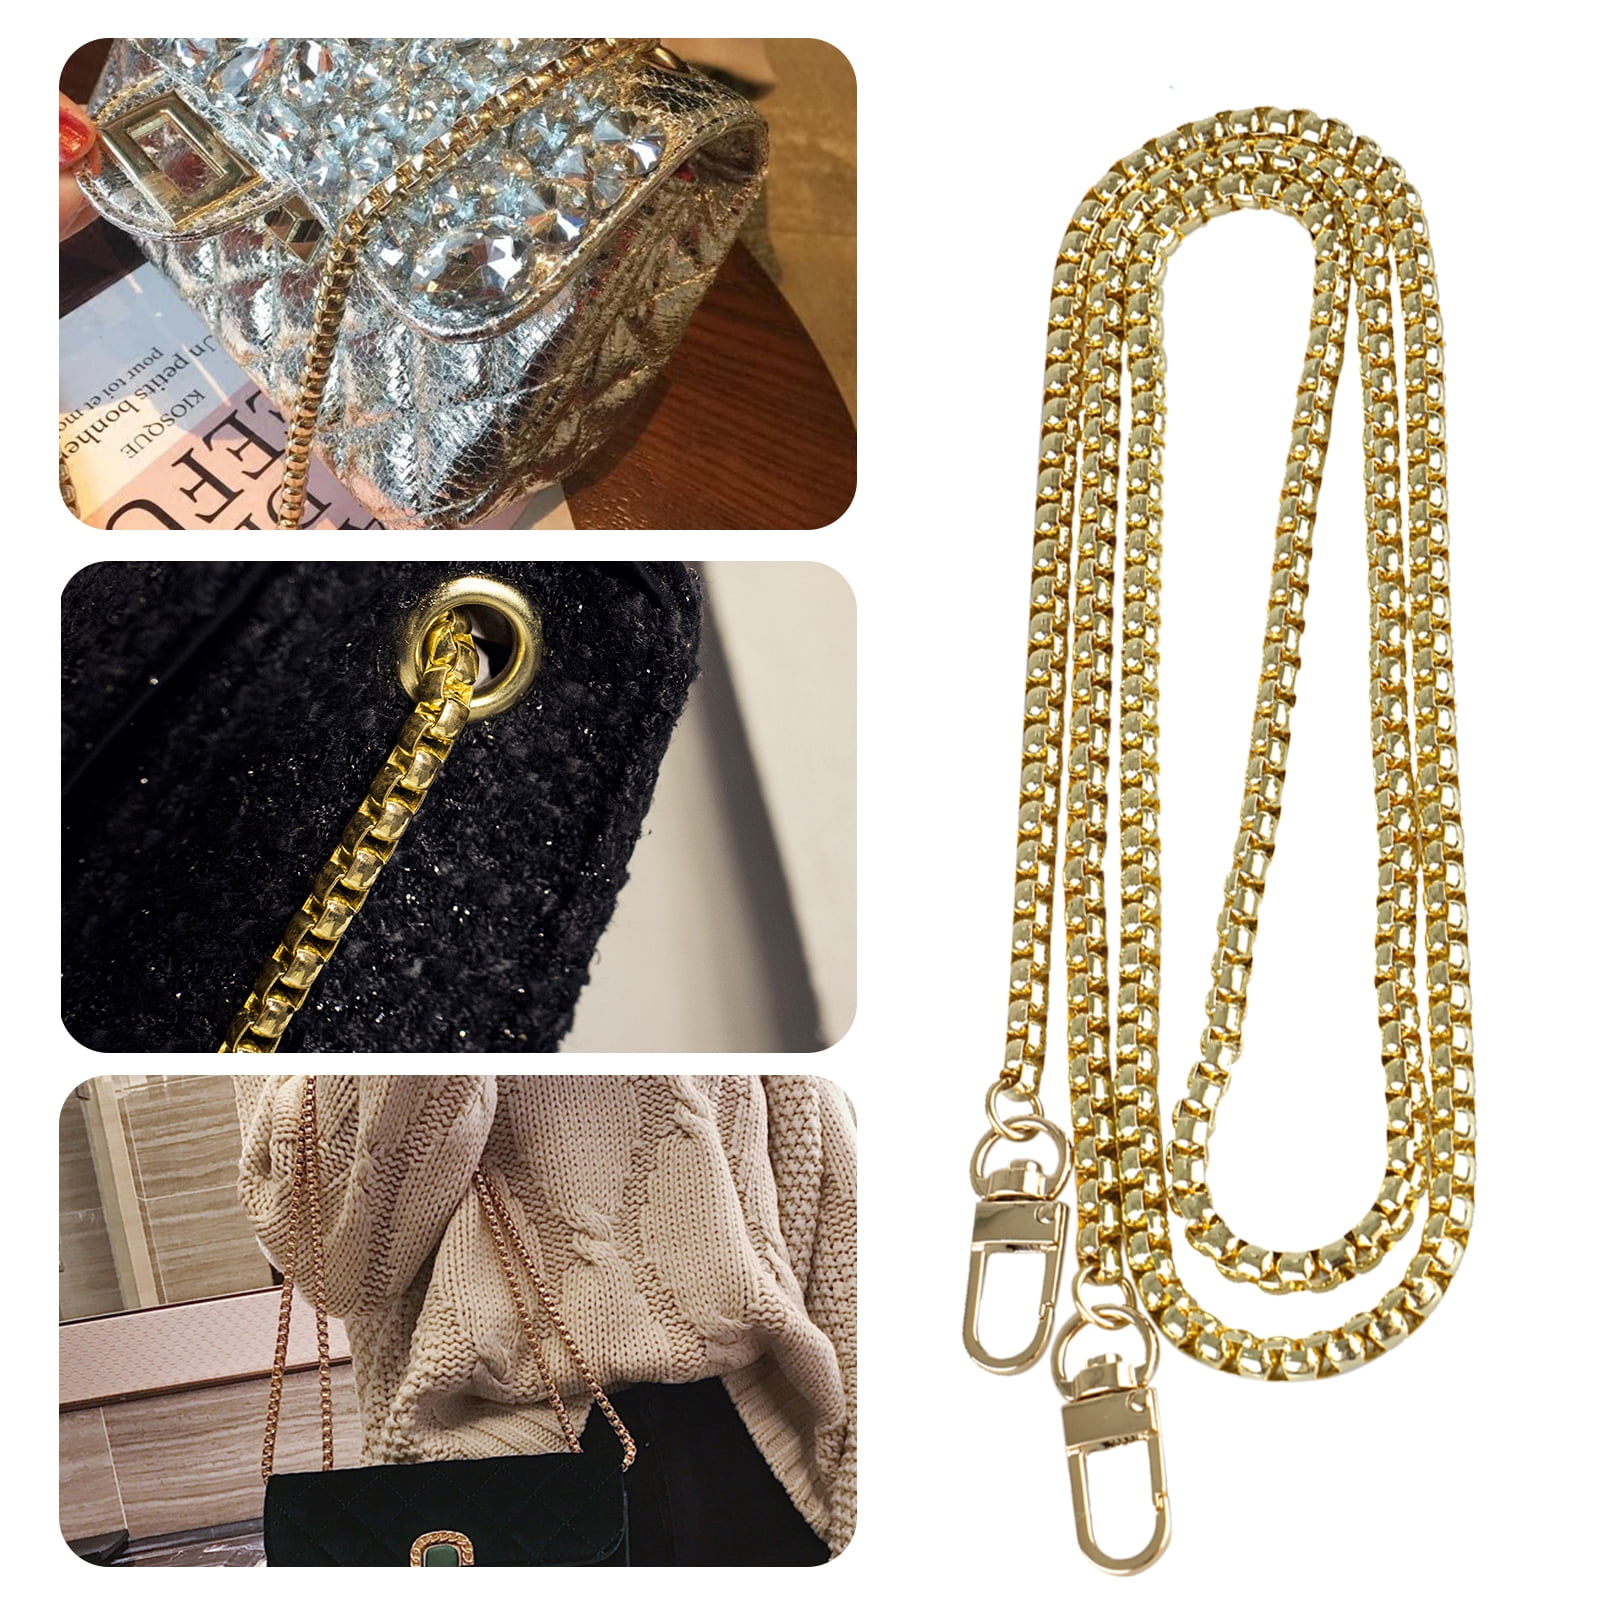 with Metal Buckles M-W 47 Iron Flat Chain Strap Handbag Chains Accessories Purse Straps Shoulder Cross Body Replacement Straps Gold